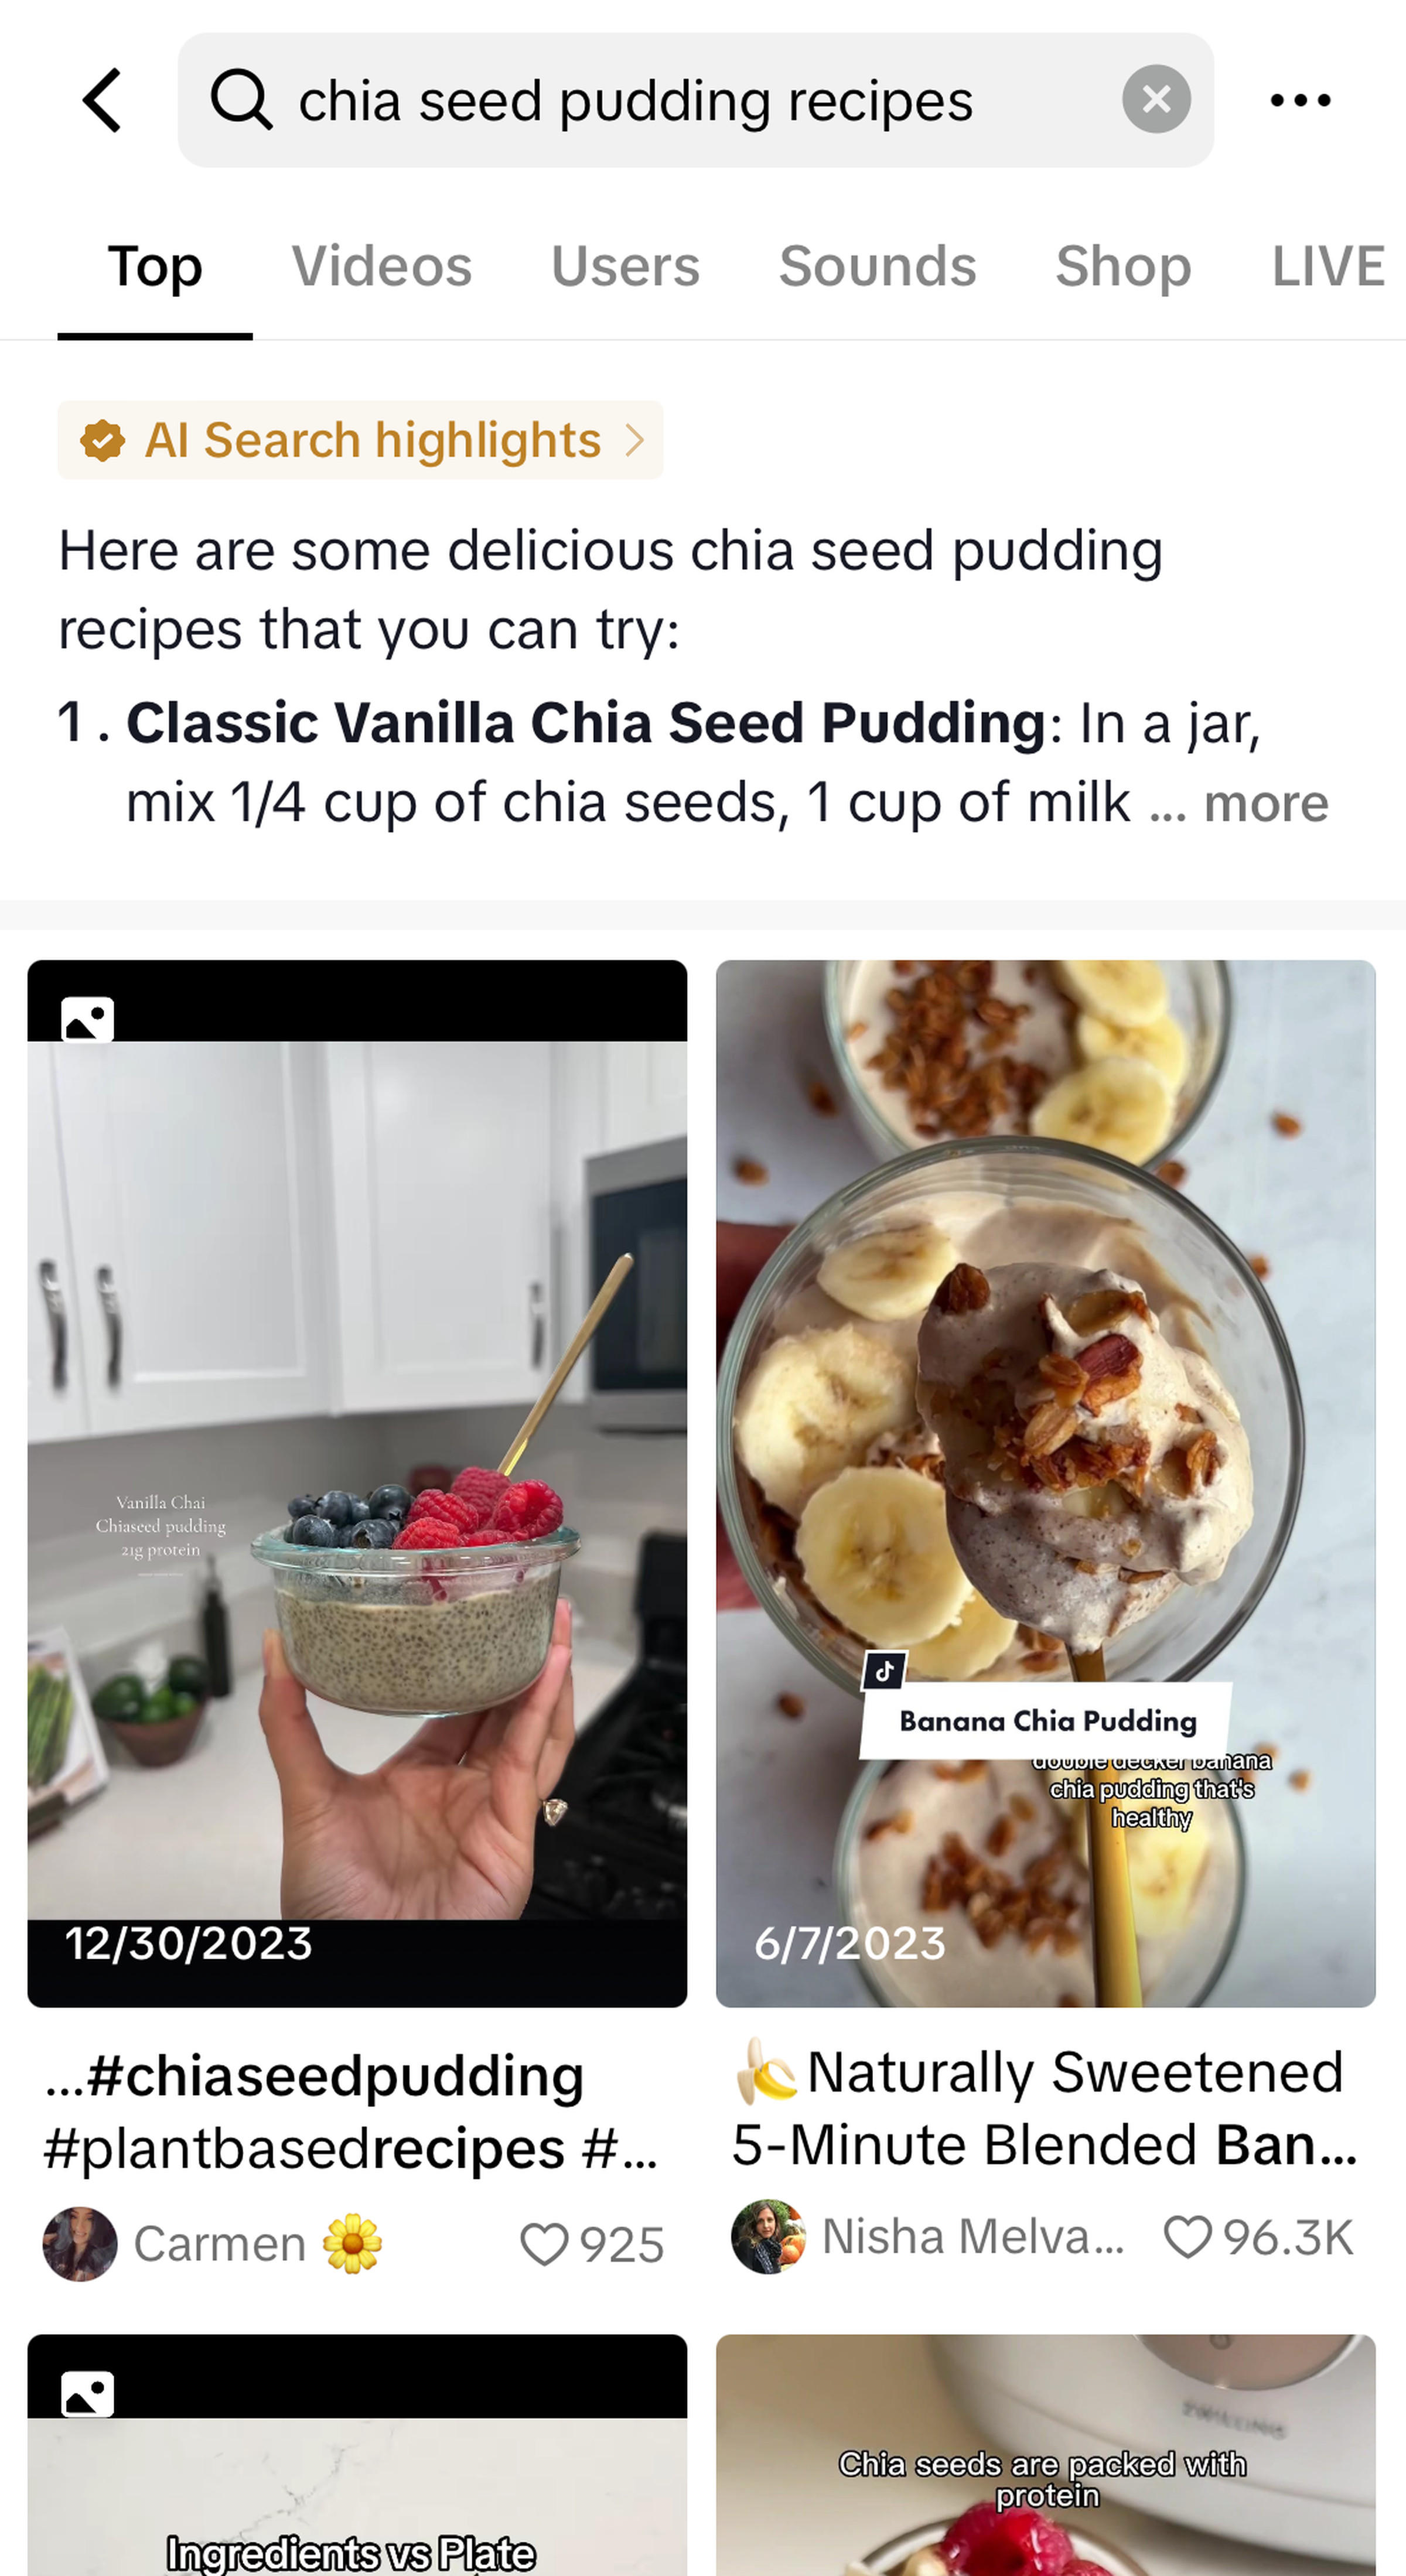 TikTok search results page for “chia seed pudding recipe” showing AI results at the top. Clicking the result takes you to a full screen page.